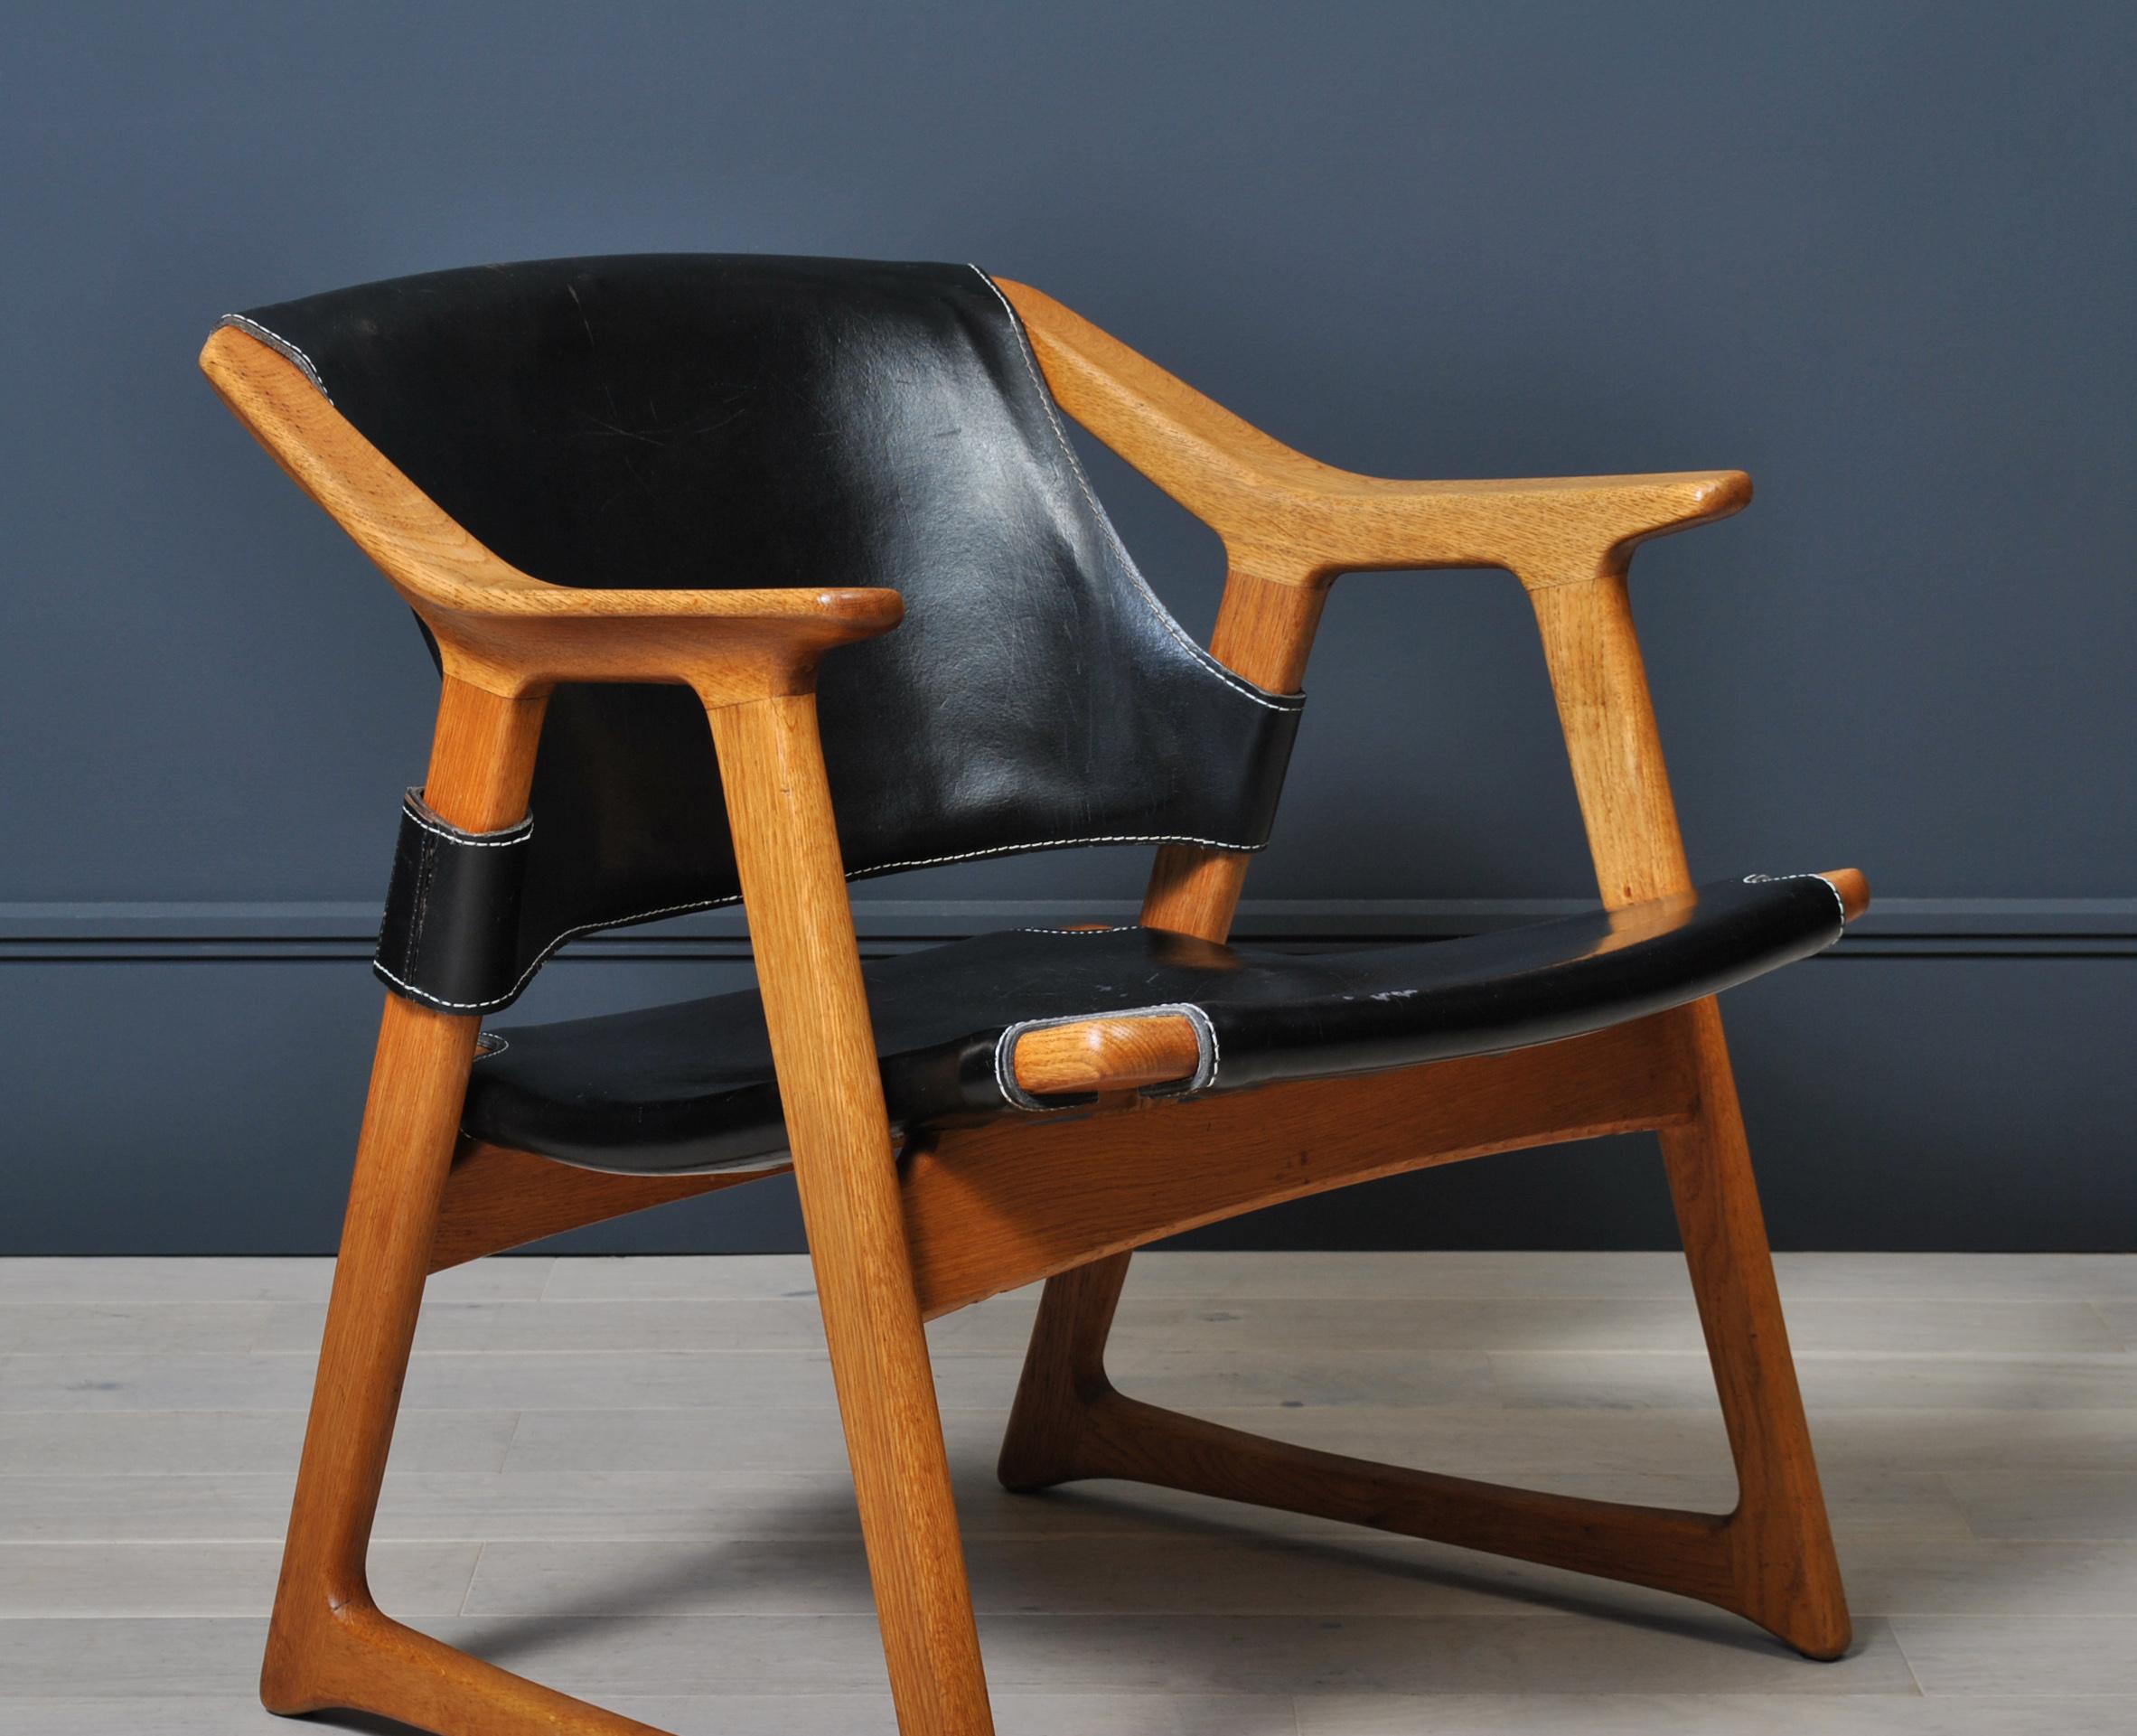 The incredibly rare ‘Fox’ chair.
Rolf Hesland designed the Fox armchair in 1958 whilst at the Bruksbo studios. Haug Snekkeri craftsman in Norway produced the chair. Golden oak frame with original black saddle leather. An outstanding contribution to